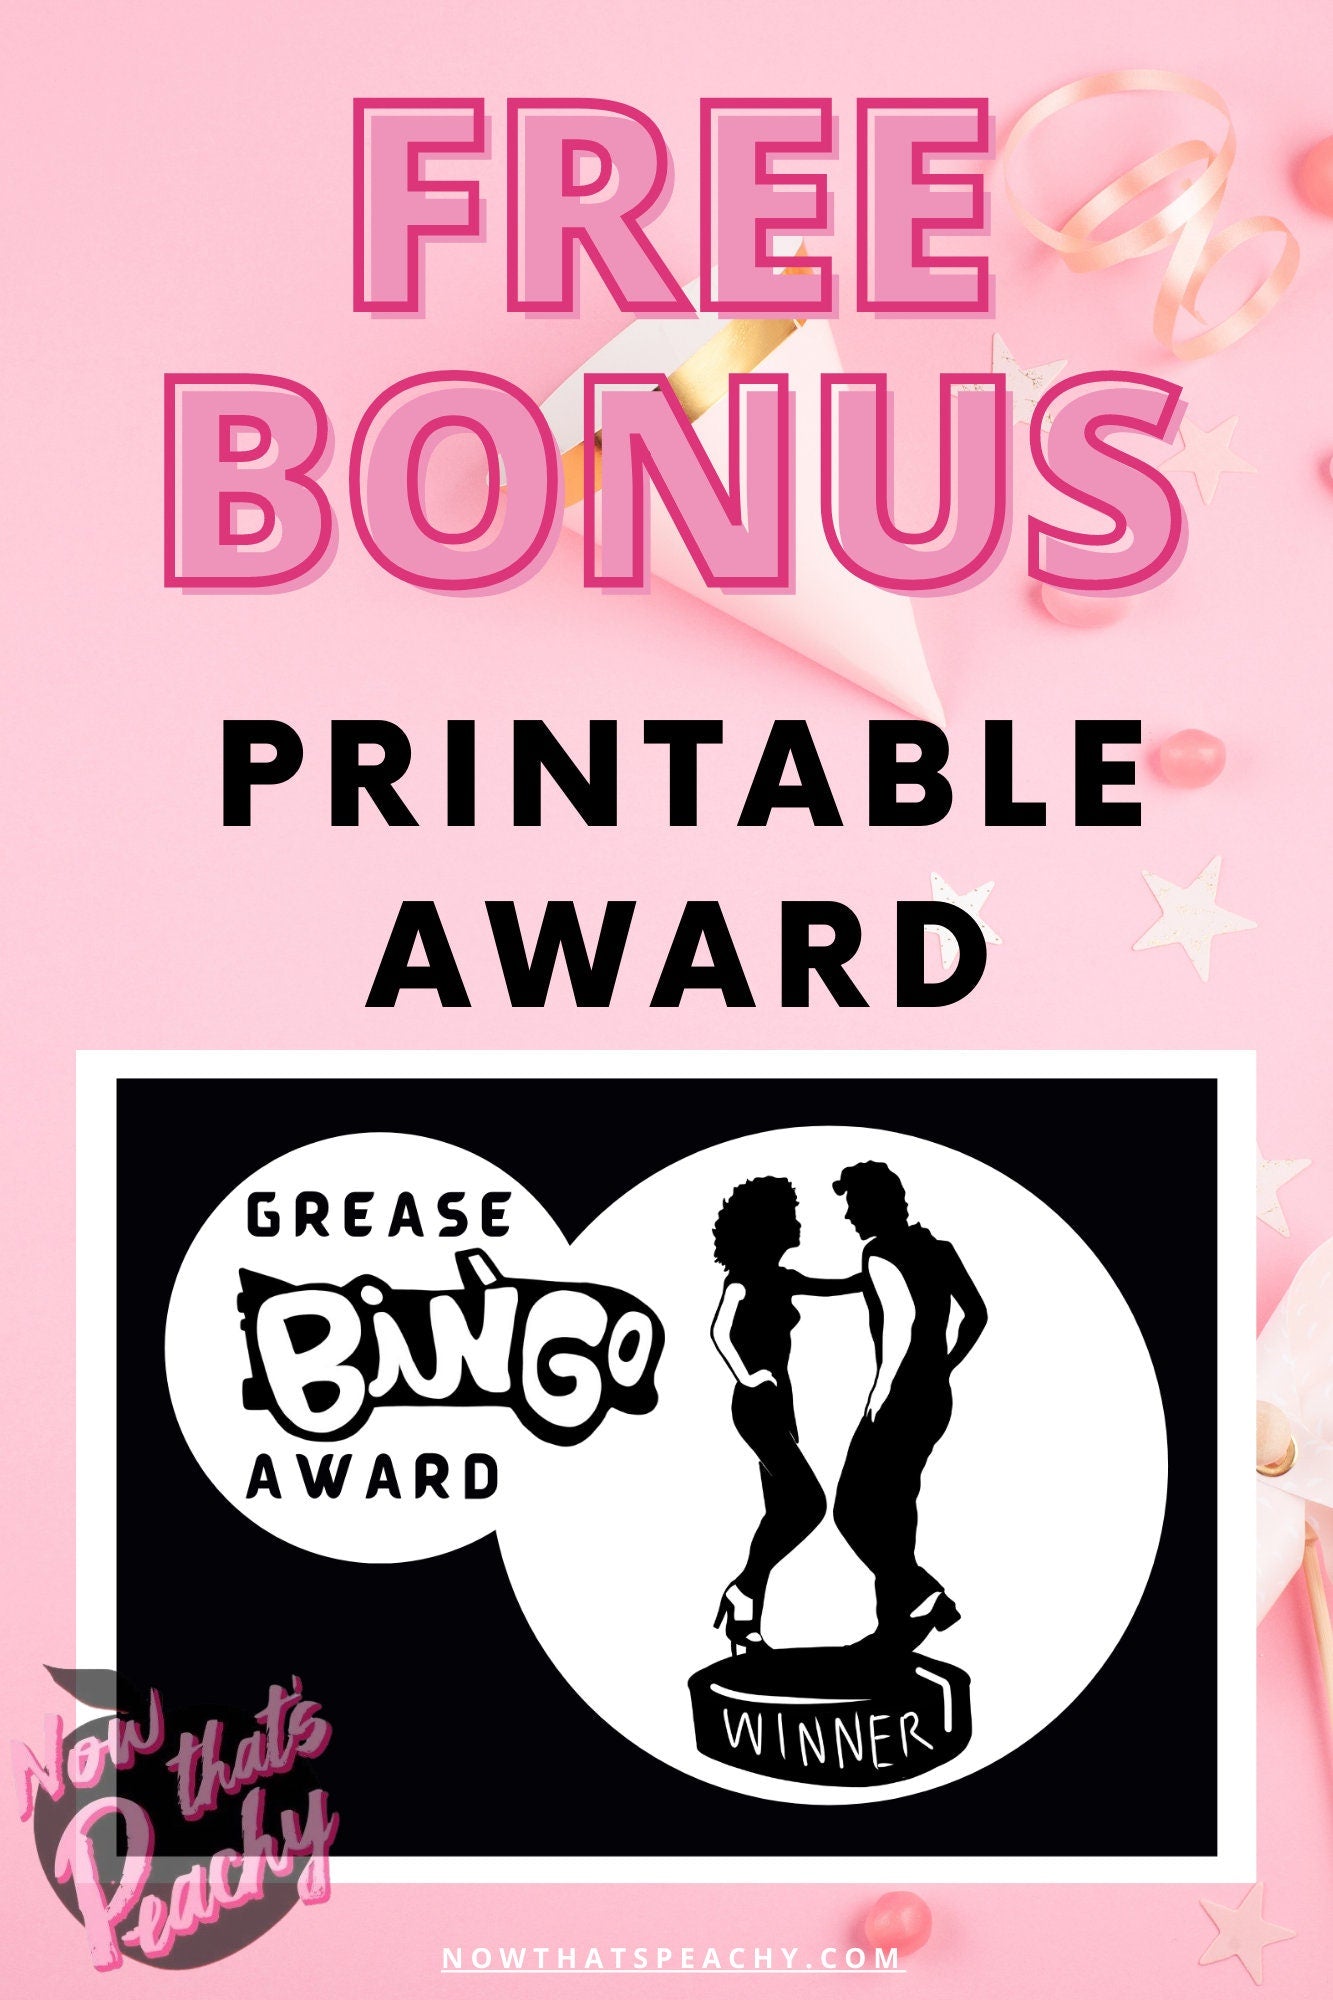 Grease Movie bingo card game party package 1950s fifties 50's printable template digital instant download edit Danny Sandy T-birds Pink Ladies  invite musical movie design black white modern color fun themed bachelorette birthday charity fundraiser event activity